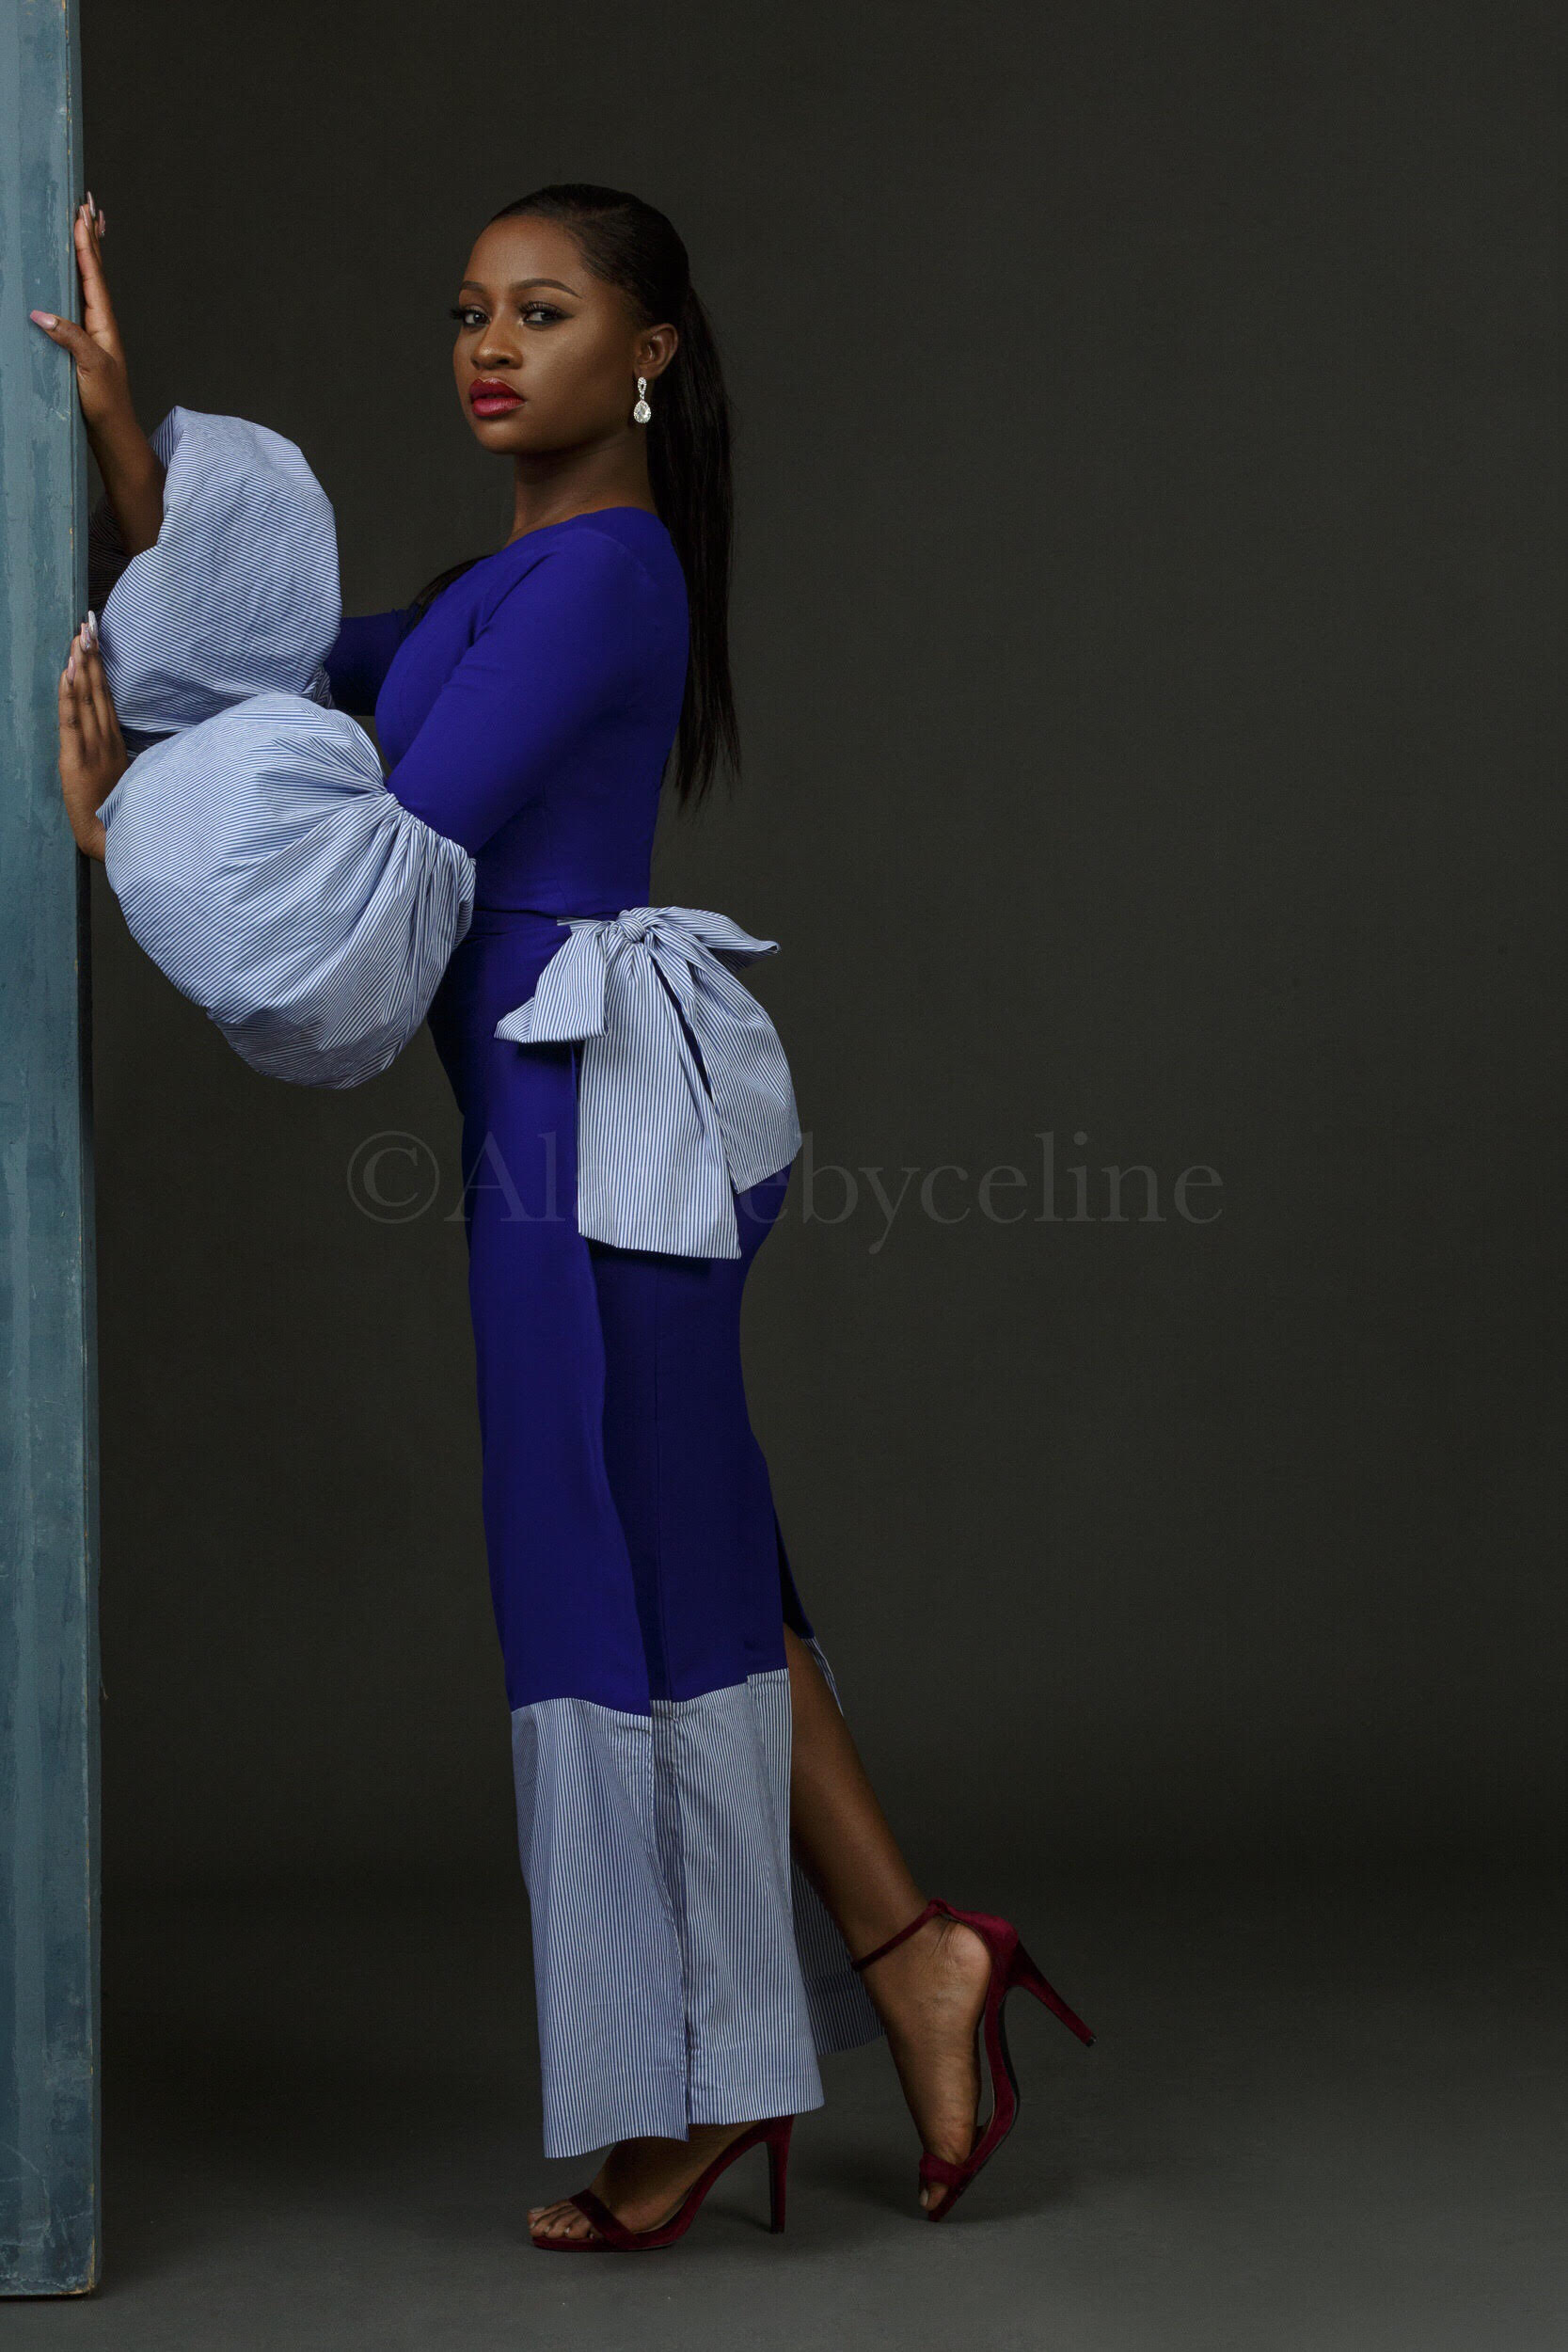 Alaine By Celine Unveils Her Virgo Collection